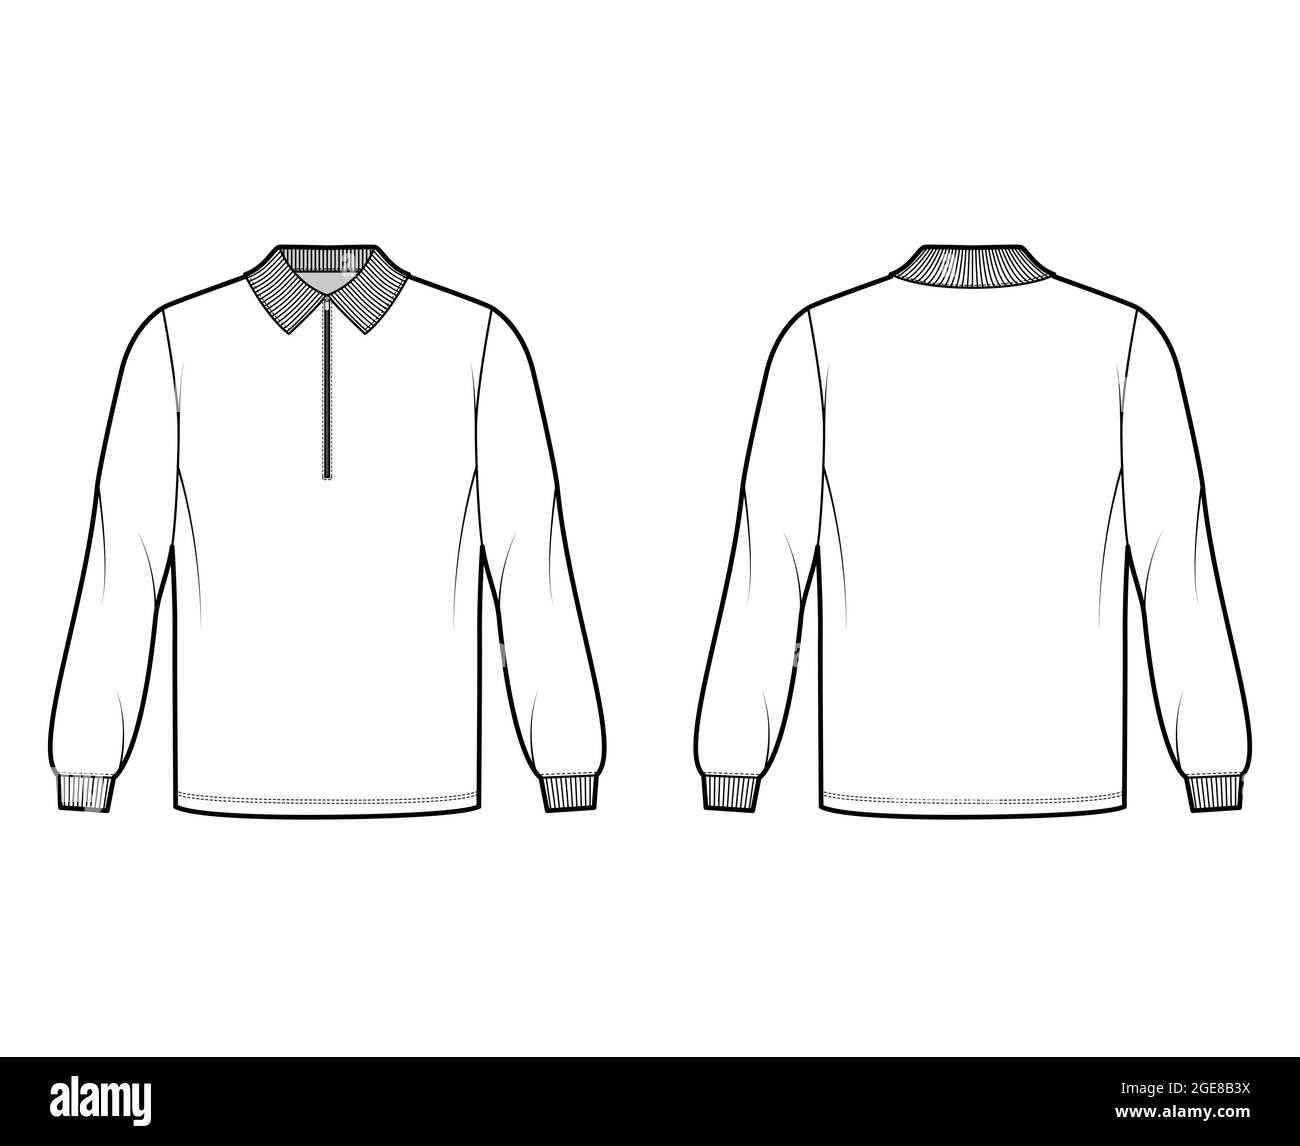 Shirt zip-up polo technical fashion illustration with long sleeves, tunic length, henley neck, oversized, flat knit collar. Apparel top outwear template front, back, white color. Women men CAD mockup Stock Vector